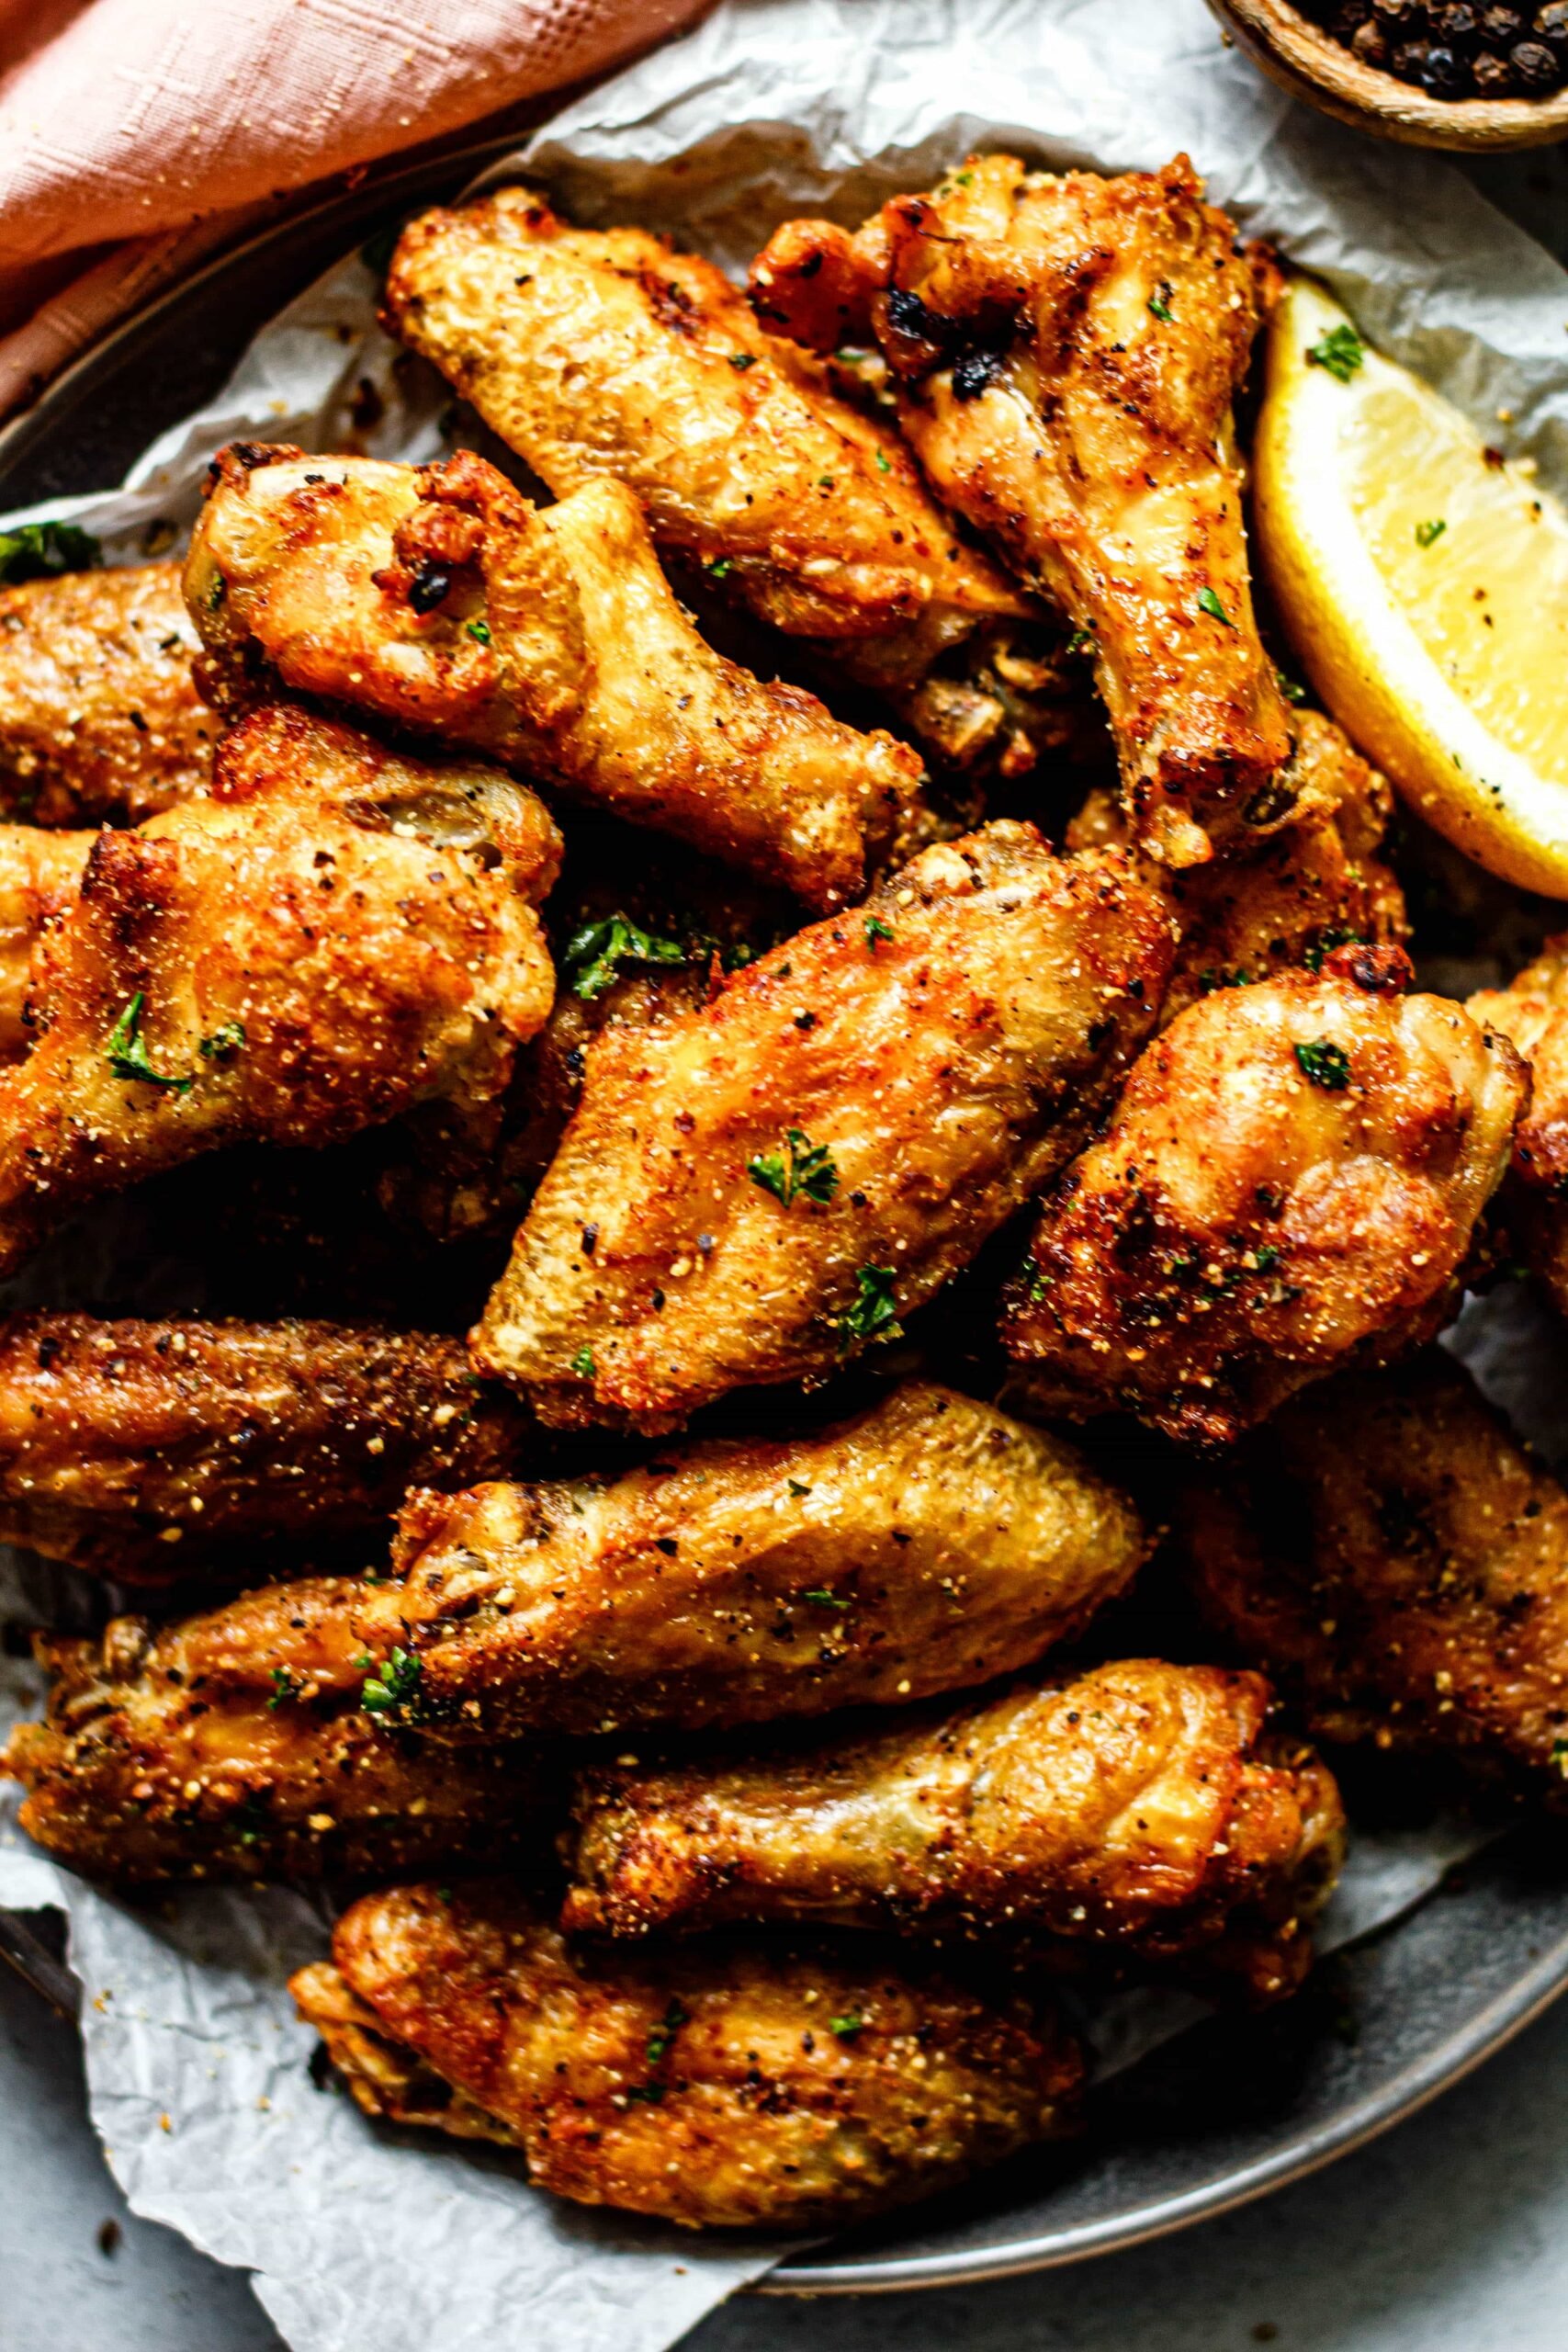 baked lemon pepper chicken wings on a plate with parchment paper